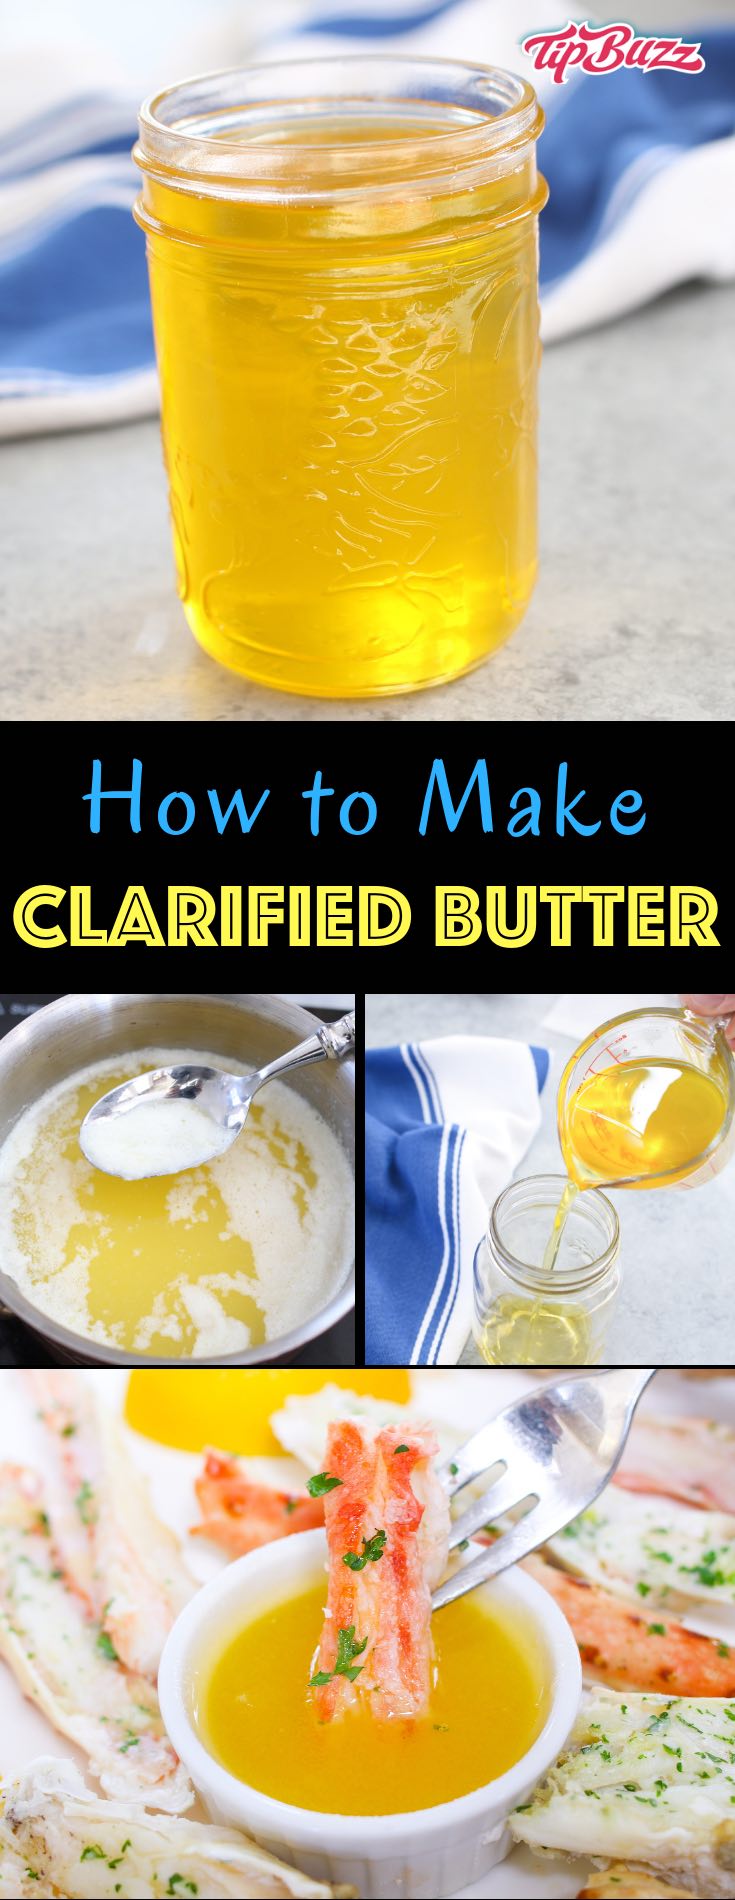 Clarified butter is a versatile cooking fat that adds mouthwatering flavor whether you’re sautéing, frying or baking dishes. Learn how to clarify butter easily and store it for use in everyday recipes!